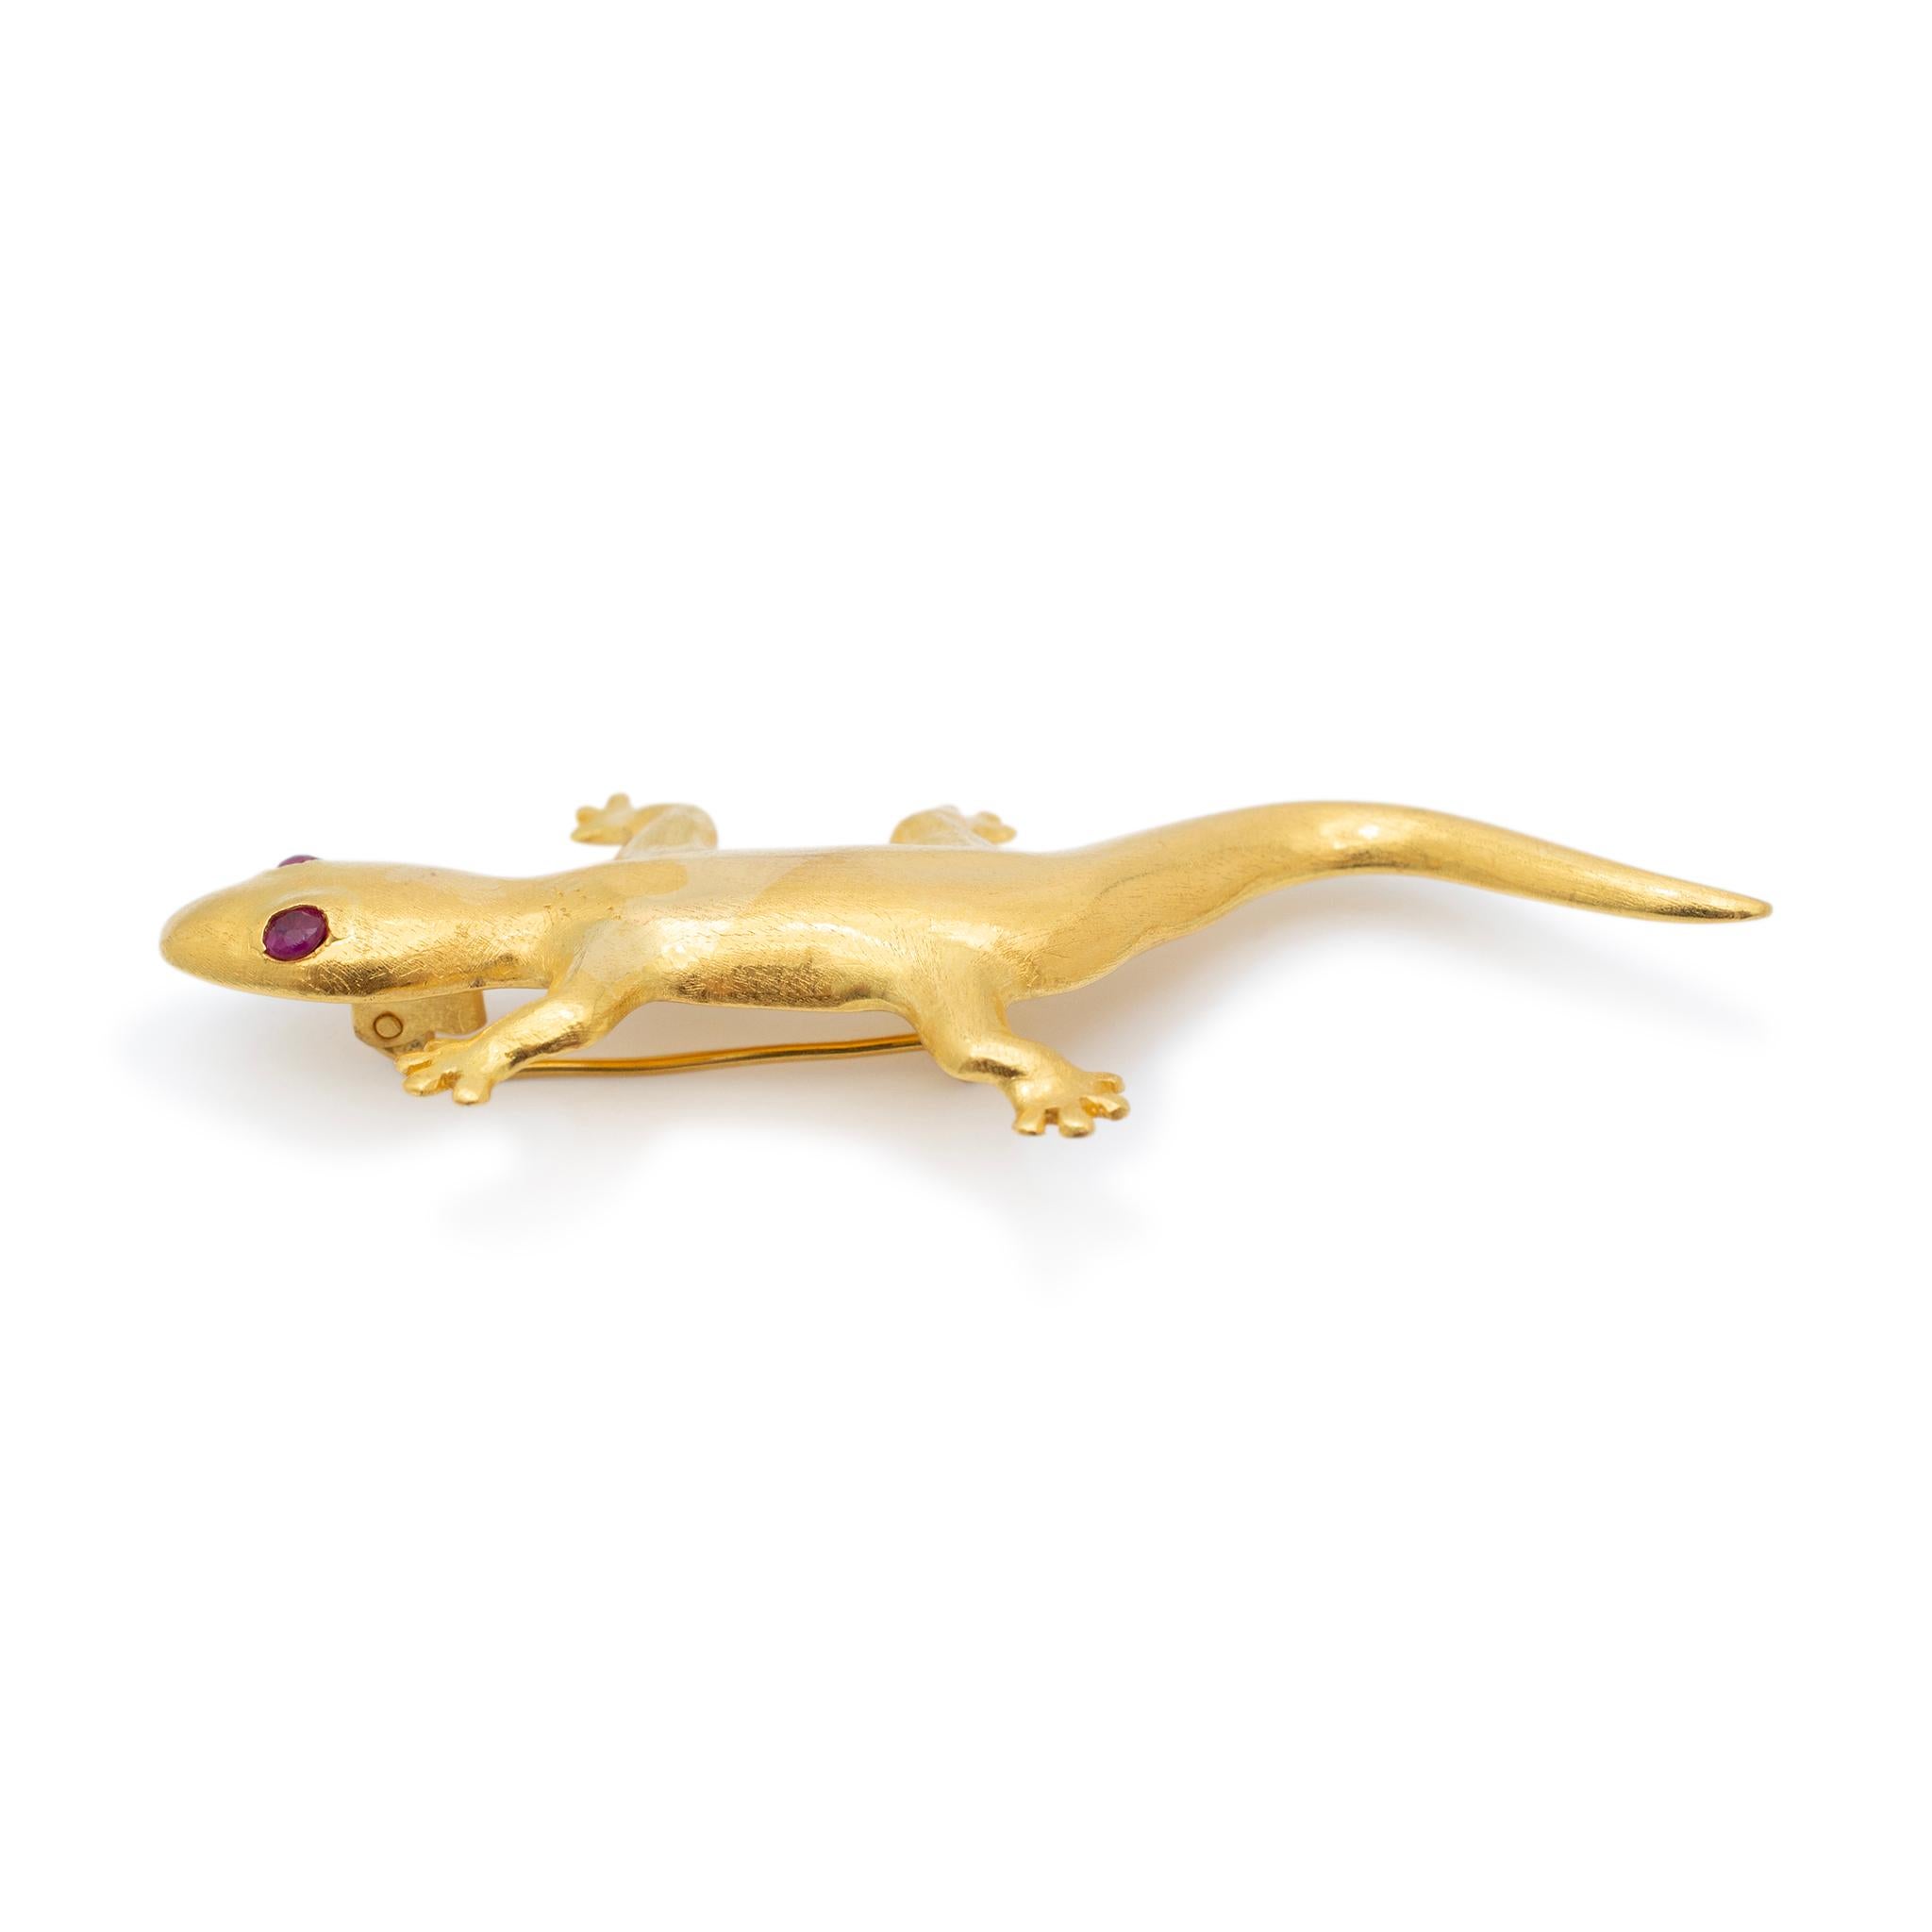 Metal Type: 23K Yellow Gold

Length: 2.50 inches

Width: 26.00 mm

Weight: 16.19 grams

Ruby eyed Lizard vintage brooch. The metal was tested and determined to be 23K yellow gold. Engraved with 